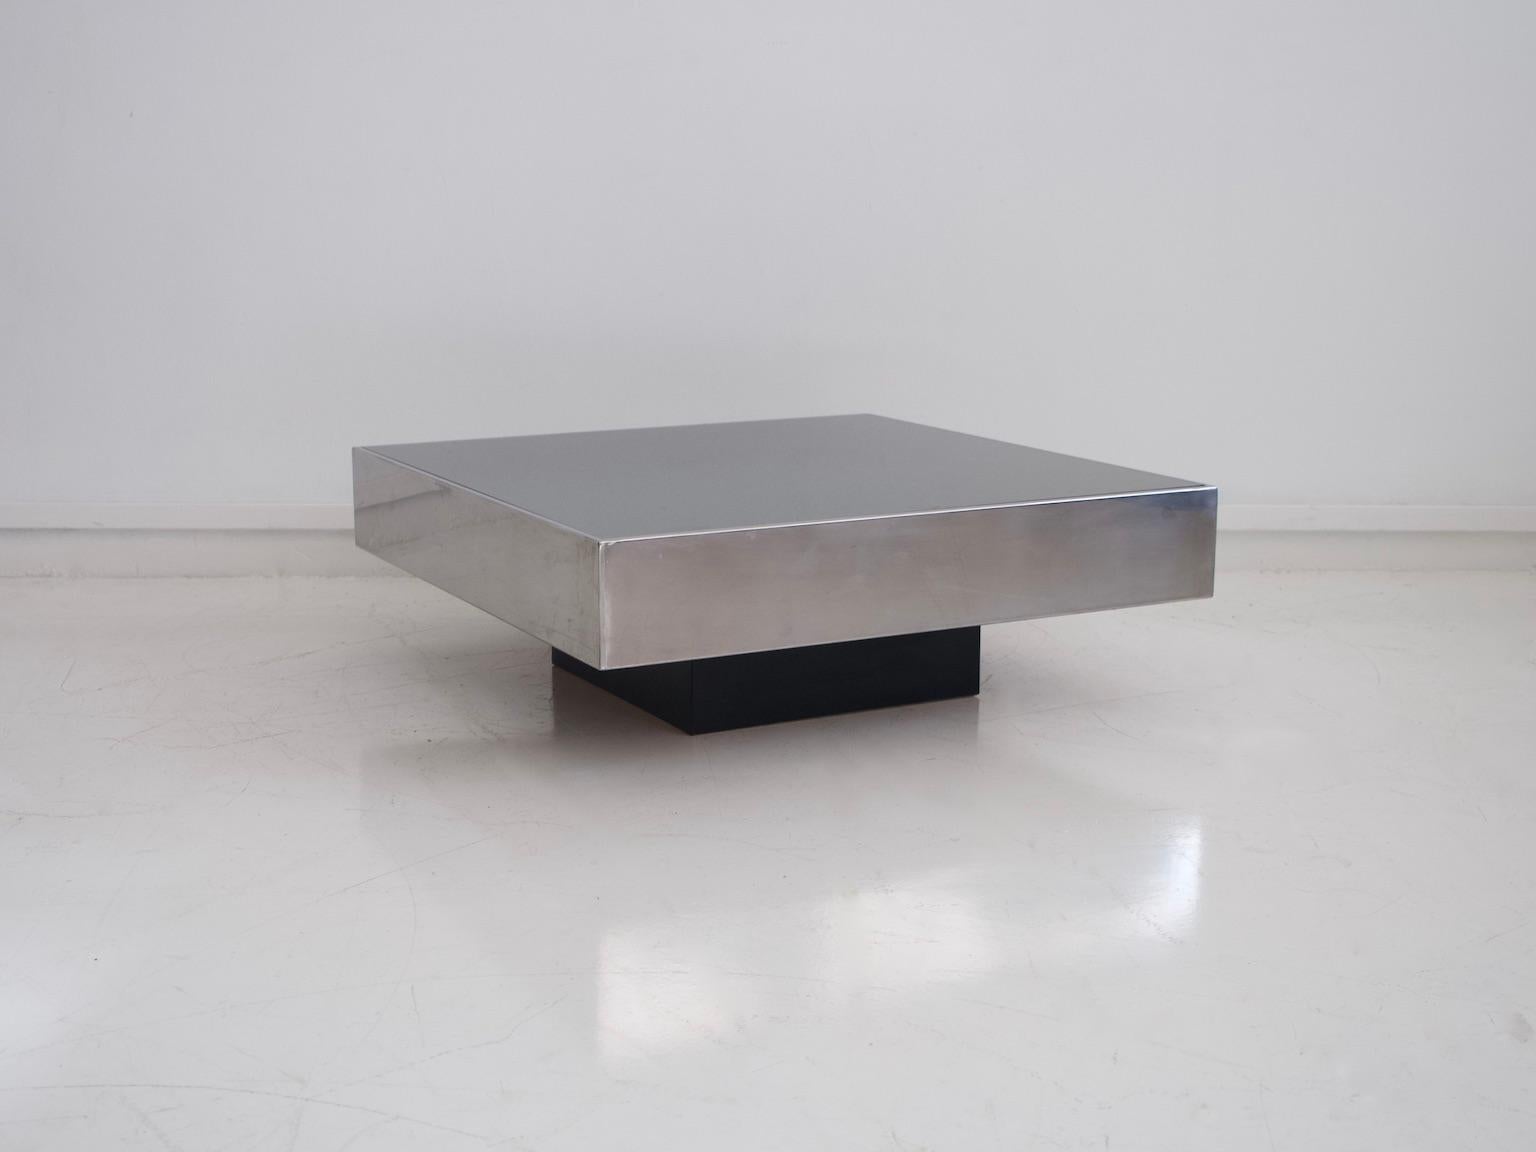 Low coffee or end table designed by Willy Rizzo and produced by Cidue, Italy in the 1970s. The frame is made of brushed steel and features a dark grey mirrored glass top.